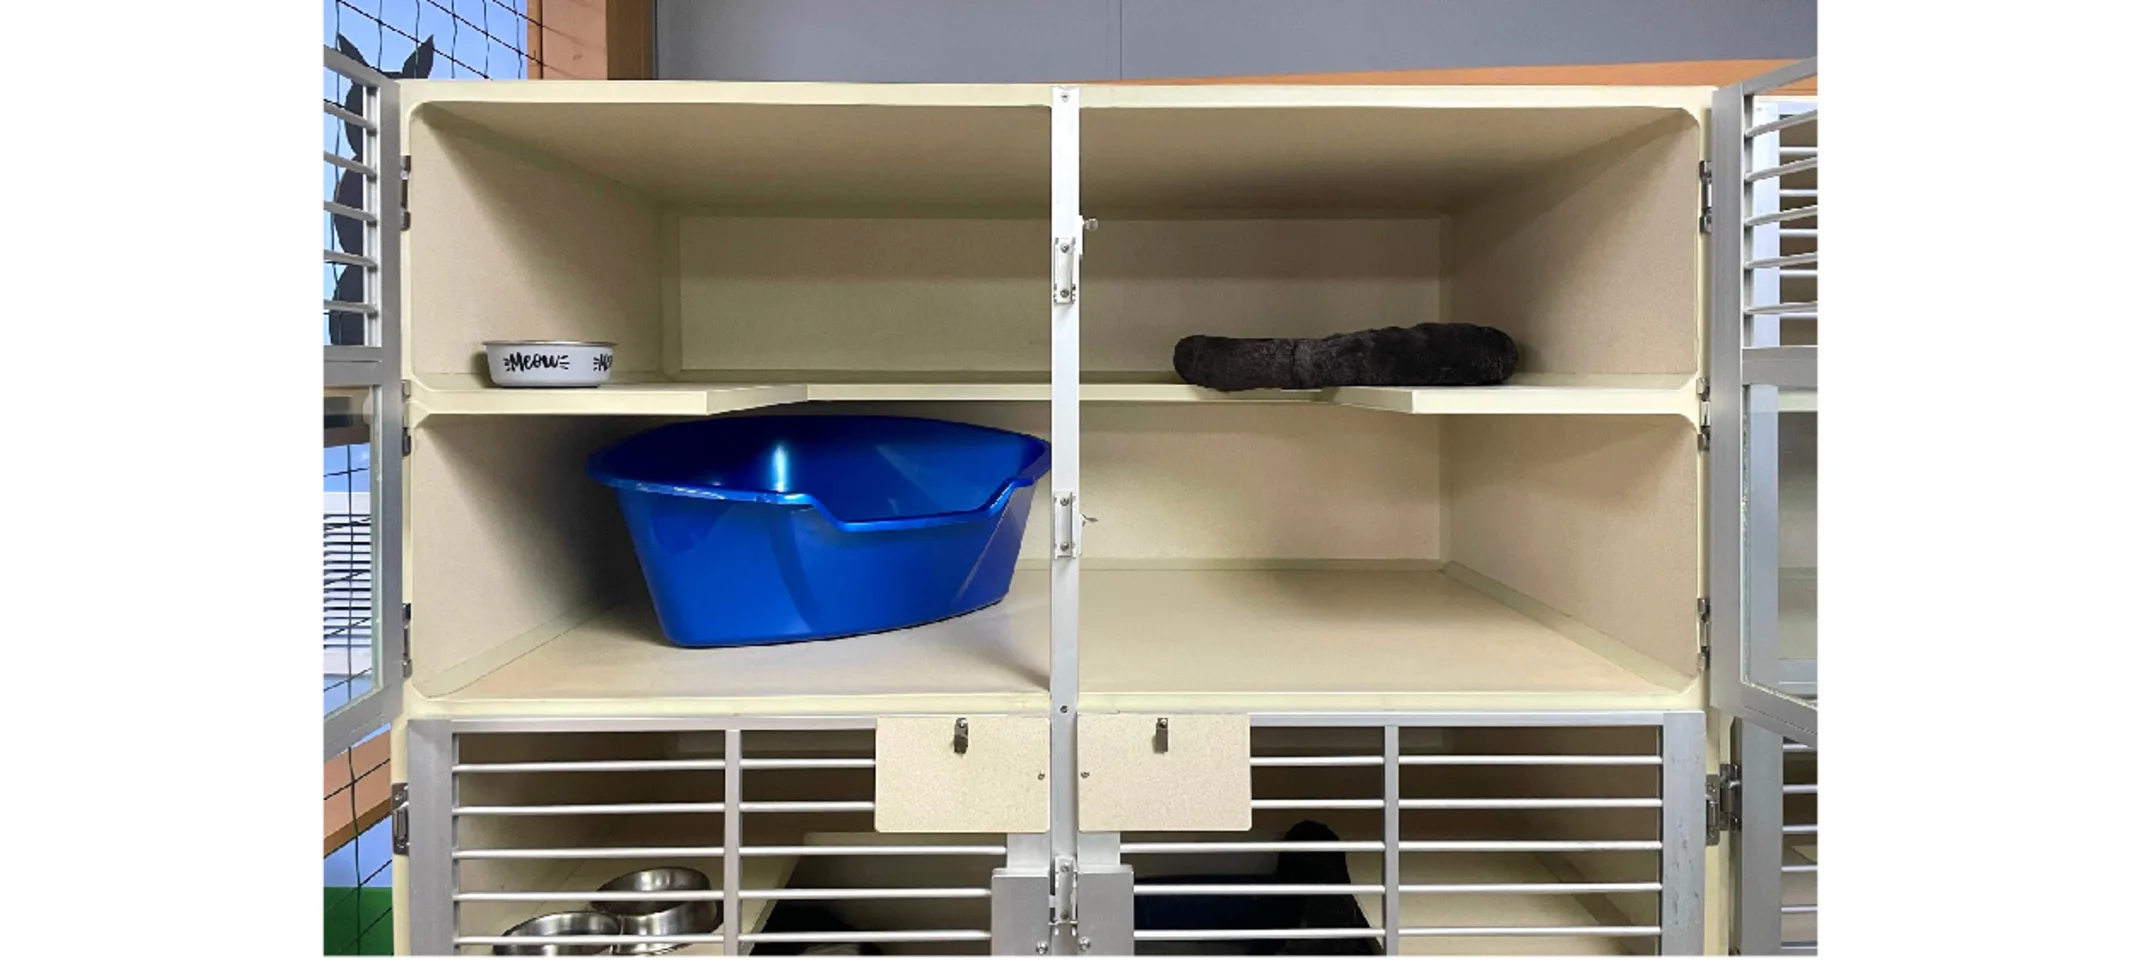 Condo space with a bowl and bed on top, and a litter box beneath